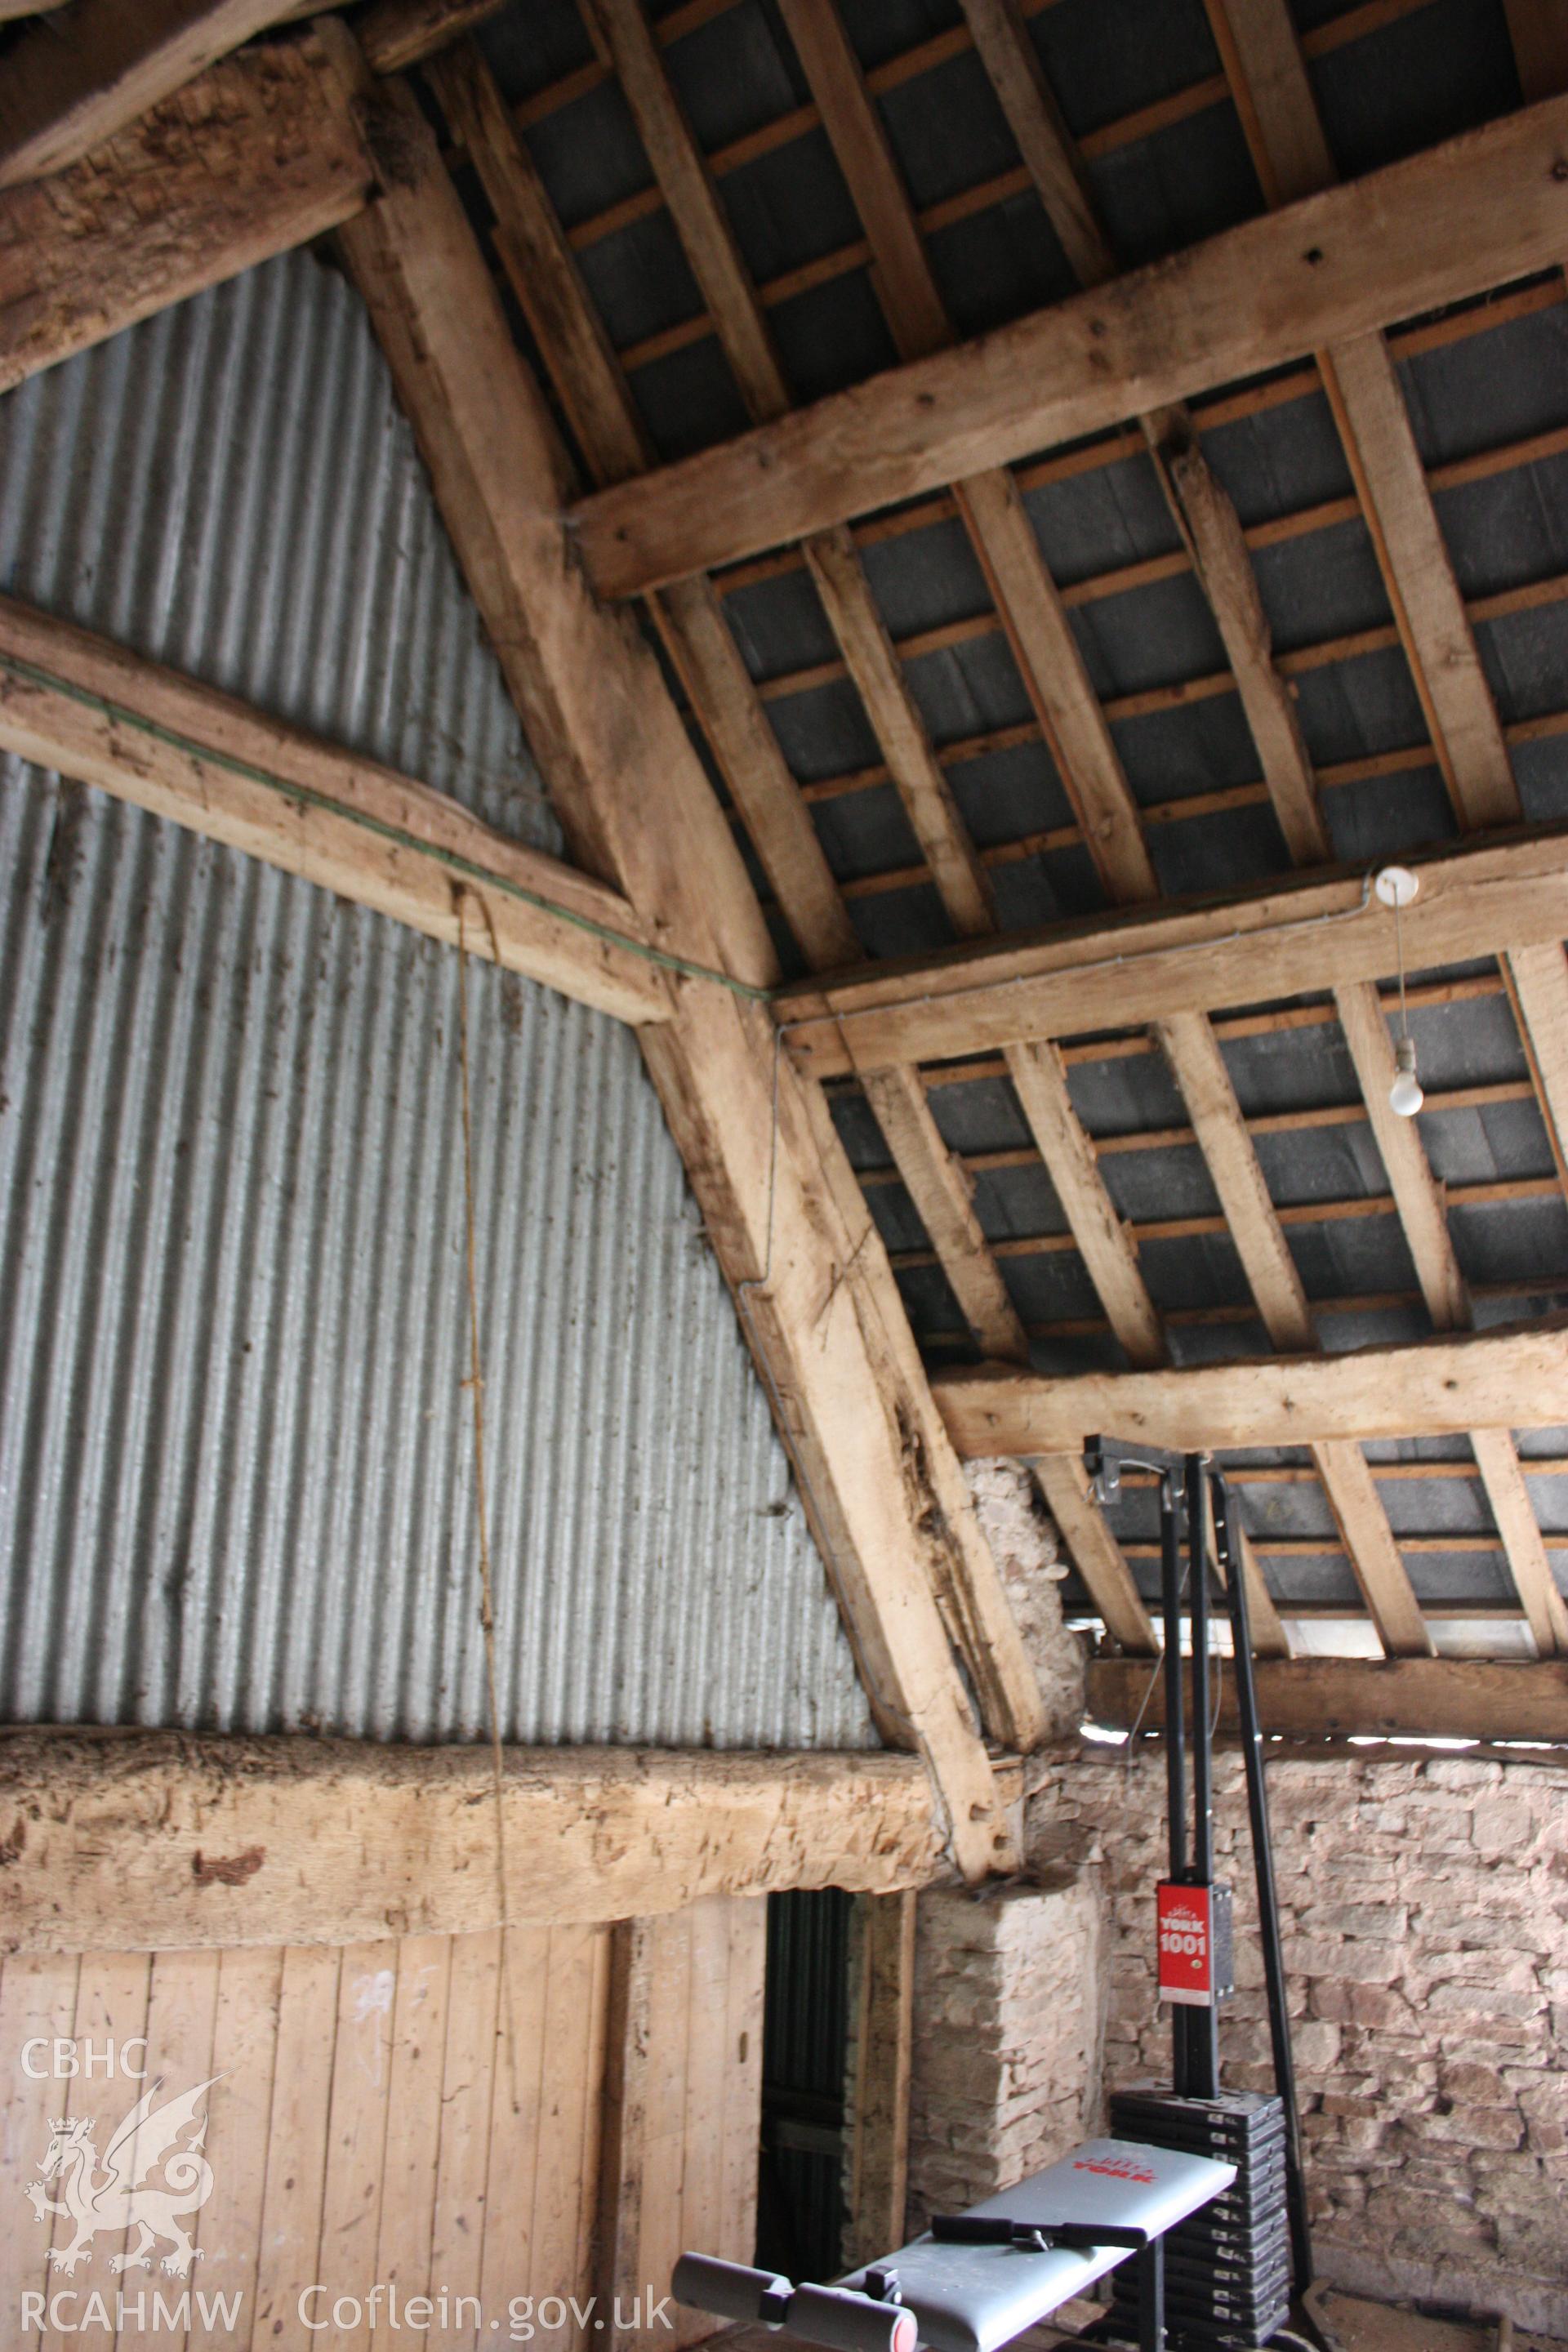 Internal view of wooden beams and corrugated iron roof at Maes Mawr. Photographic survey of Marian Mawr in Cwm, Denbighshire by Geoff Ward on 20th August 2010.